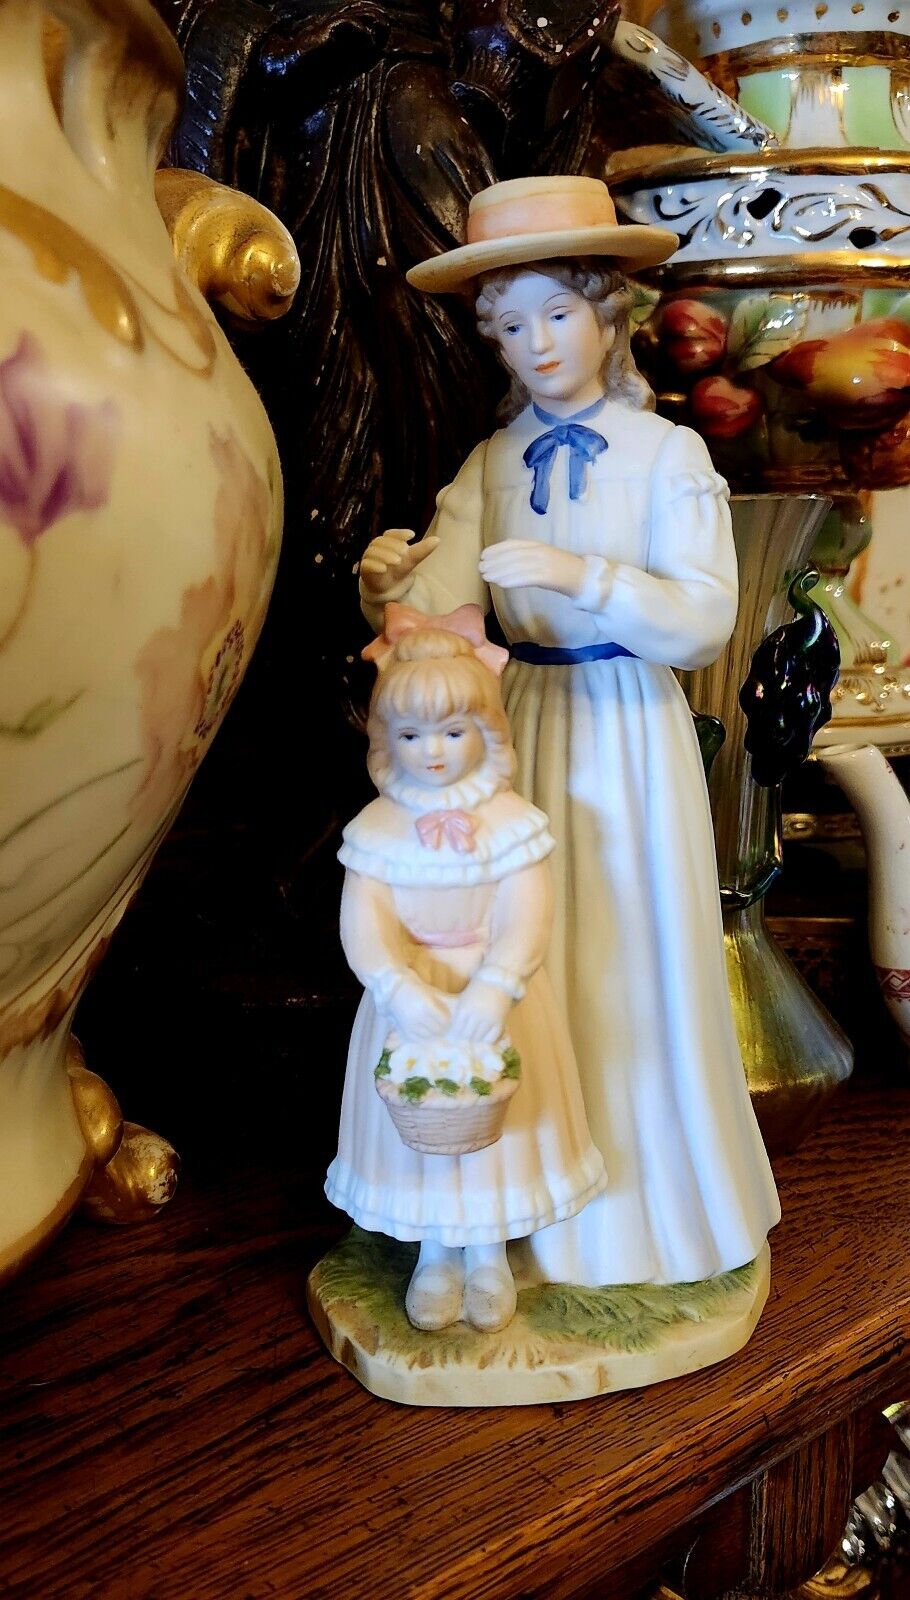 Vintage Homeco Ready For Church Mother And Daughter Figurine 8 Inches Rare Find